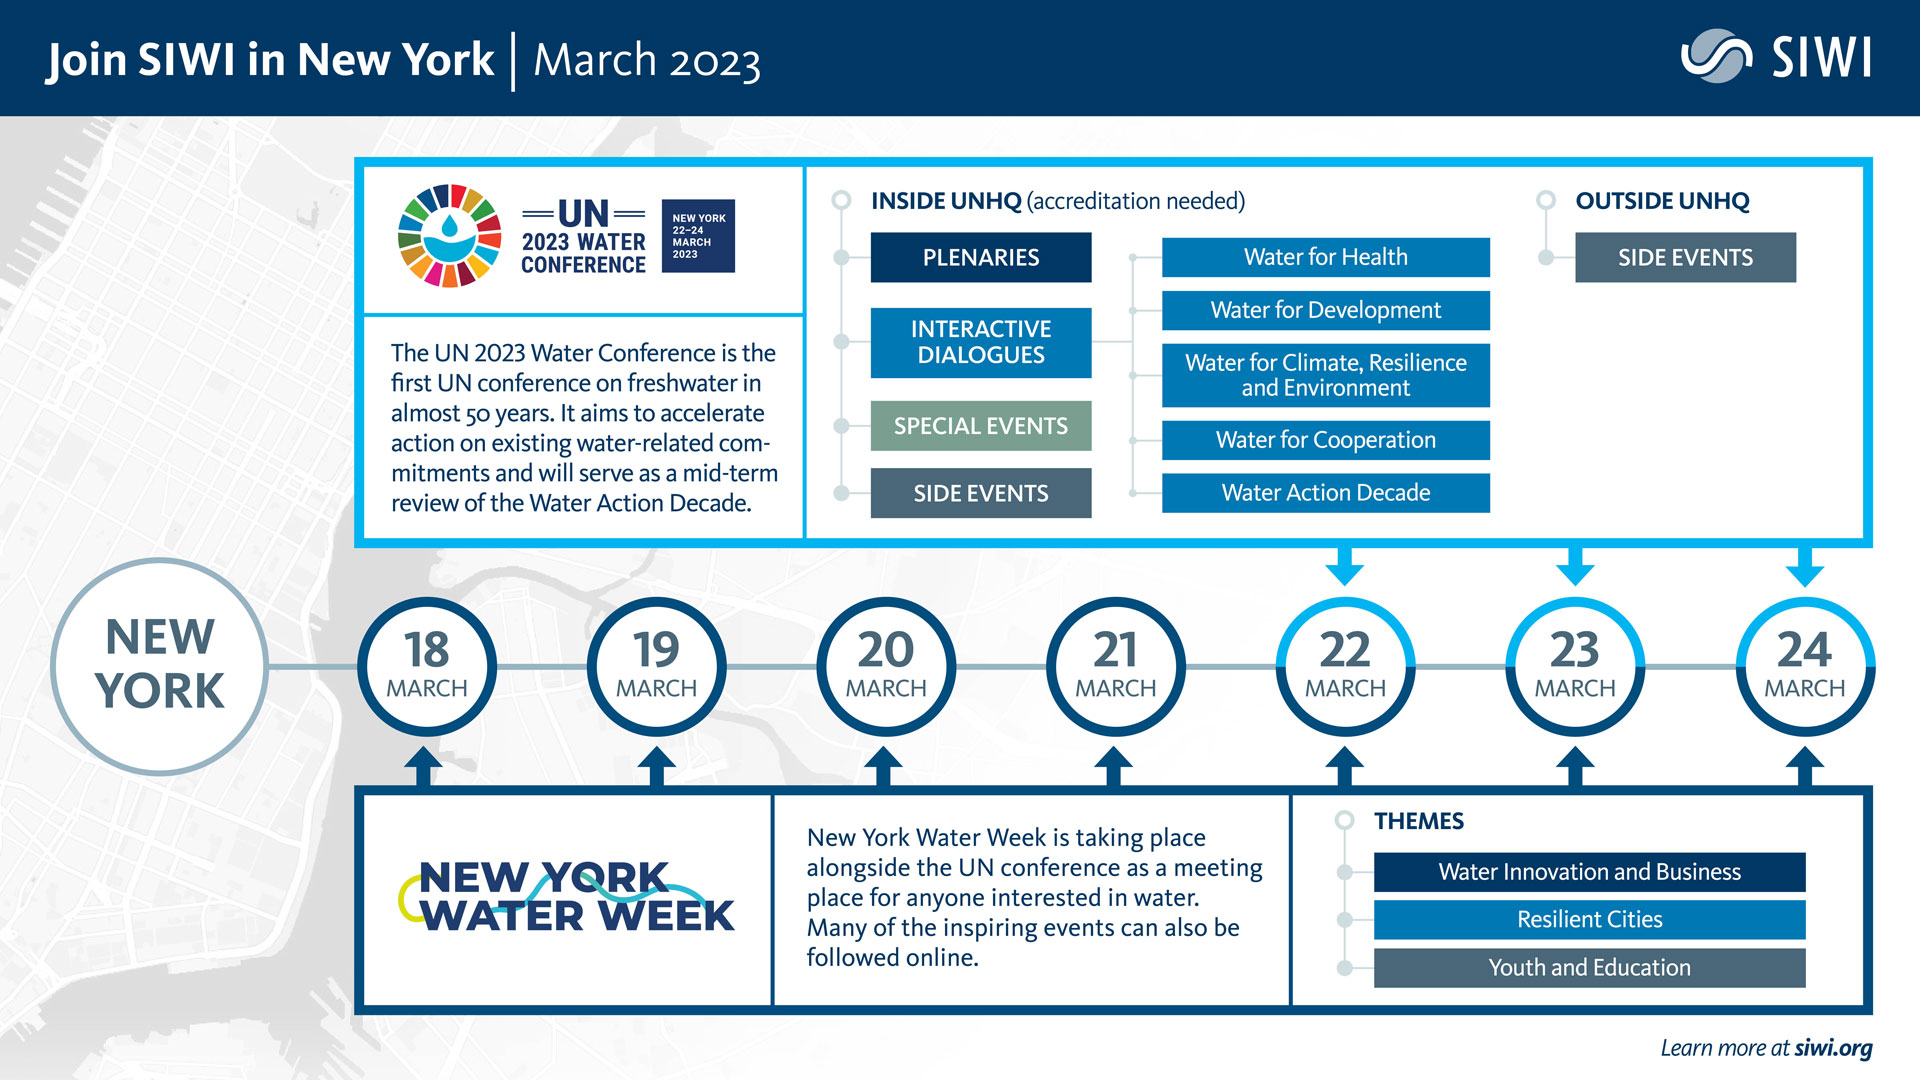 Diagram: Join SIWI to New York | March 2023 UN 2023 Water Conference - 22-24 March: The UN 2023 Water Conference is the first UN Conference on freshwater in almost 50 years. It aims to accelerate action on existing water-related commitments and will serve a mid-term review of the Water Action Decade. New York Water Week - 18 - 24 March: ew York Water Week is taking place alongside the UN conference as a meeting place for anyone interested in water. Many of the inspiring events can also be followed online.